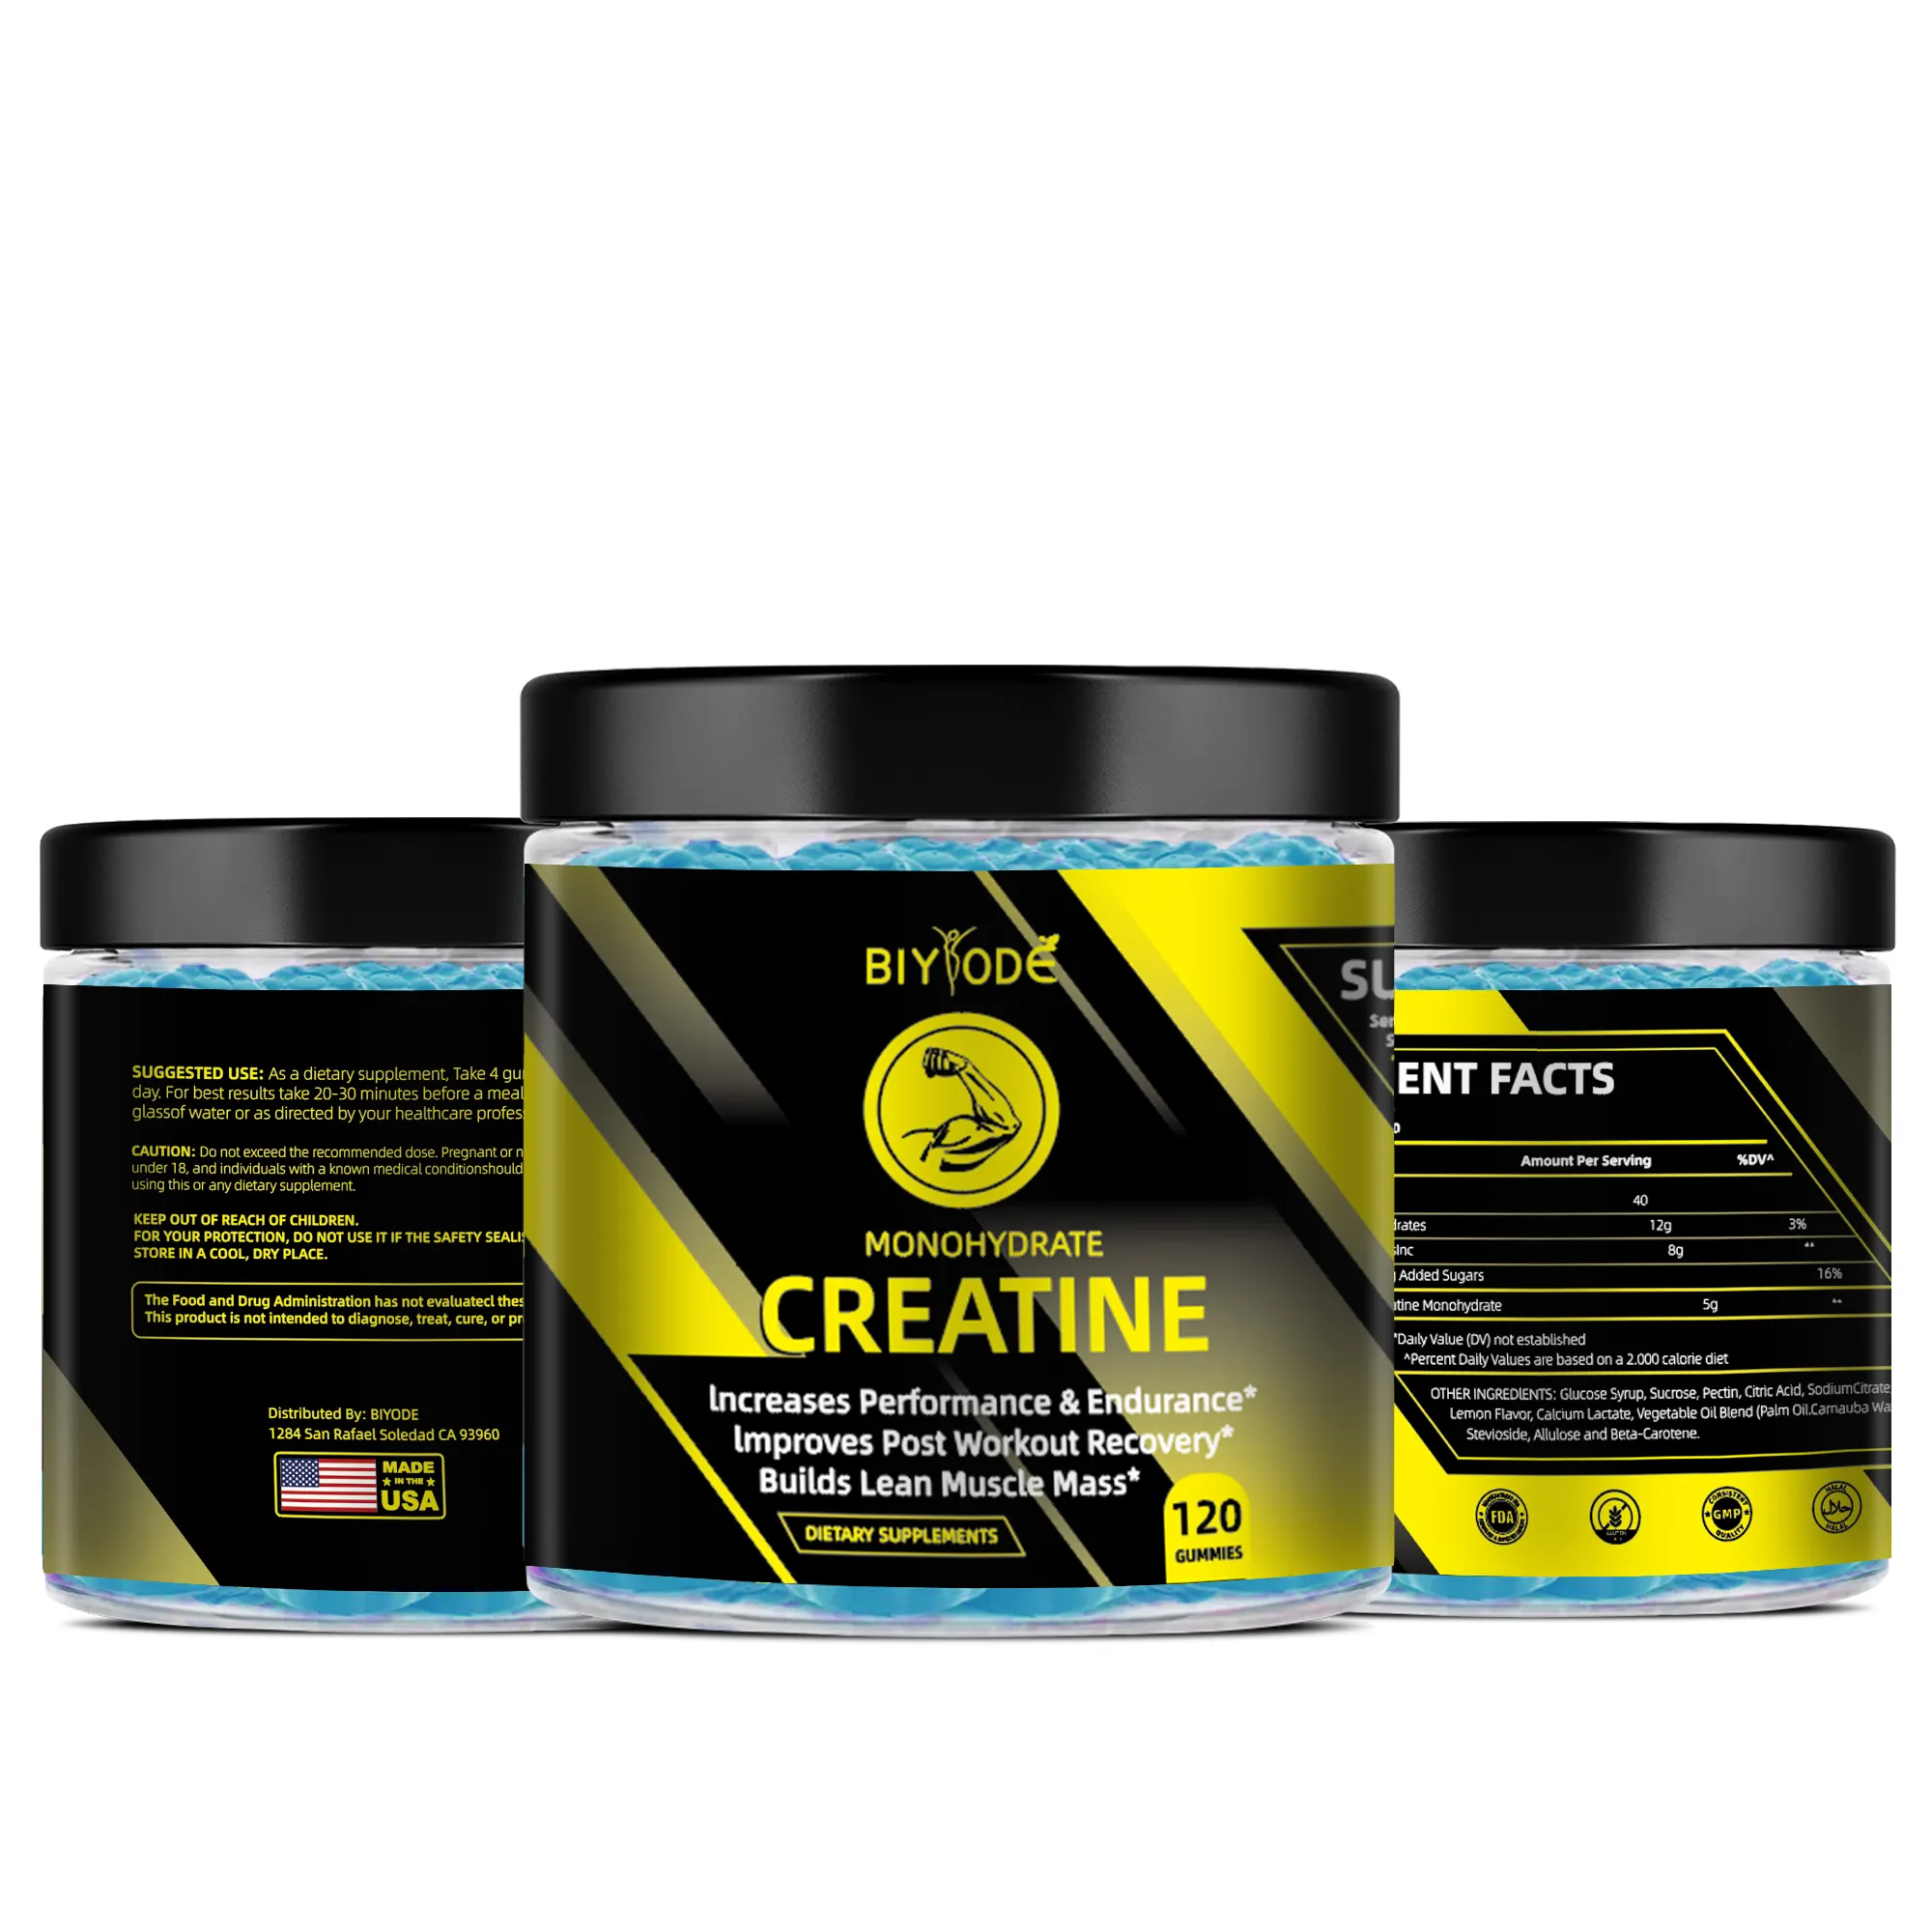 BIYODE creatine monohydrate pre workout private label wholesale for muscle tech building sport nutrition supplement 120 gummies